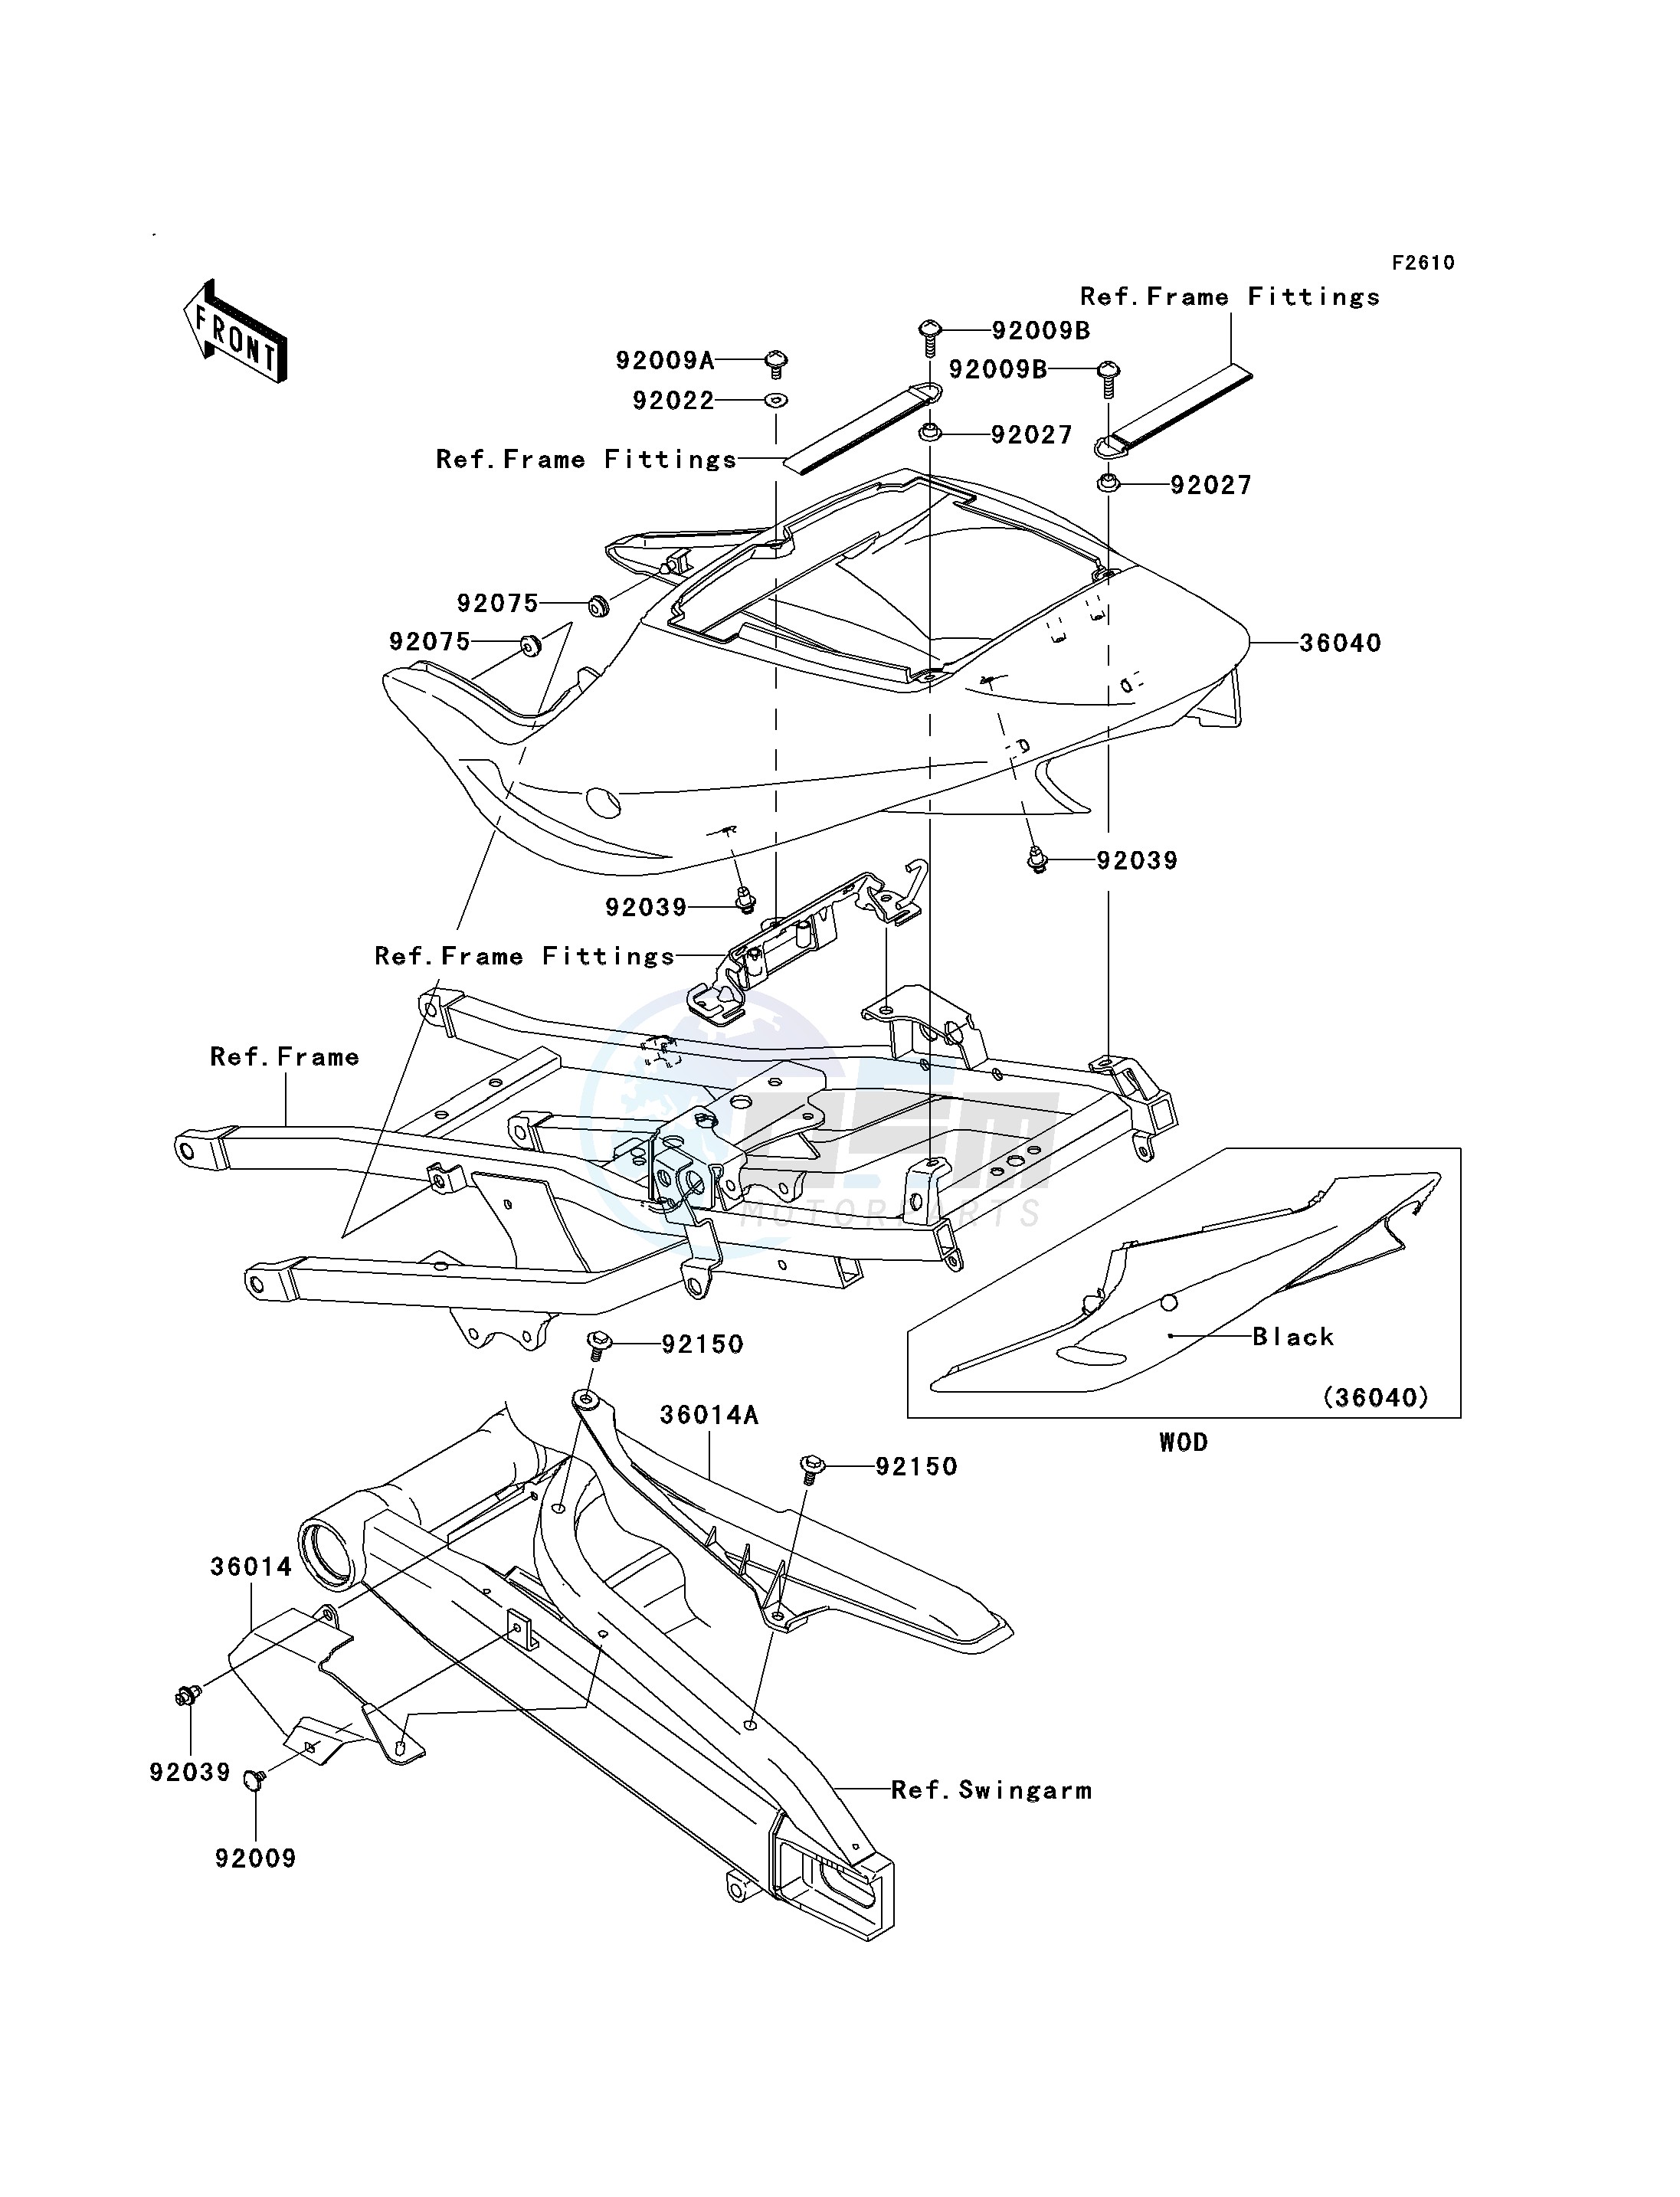 SIDE COVERS_CHAIN COVER-- ZX900-F1- - blueprint